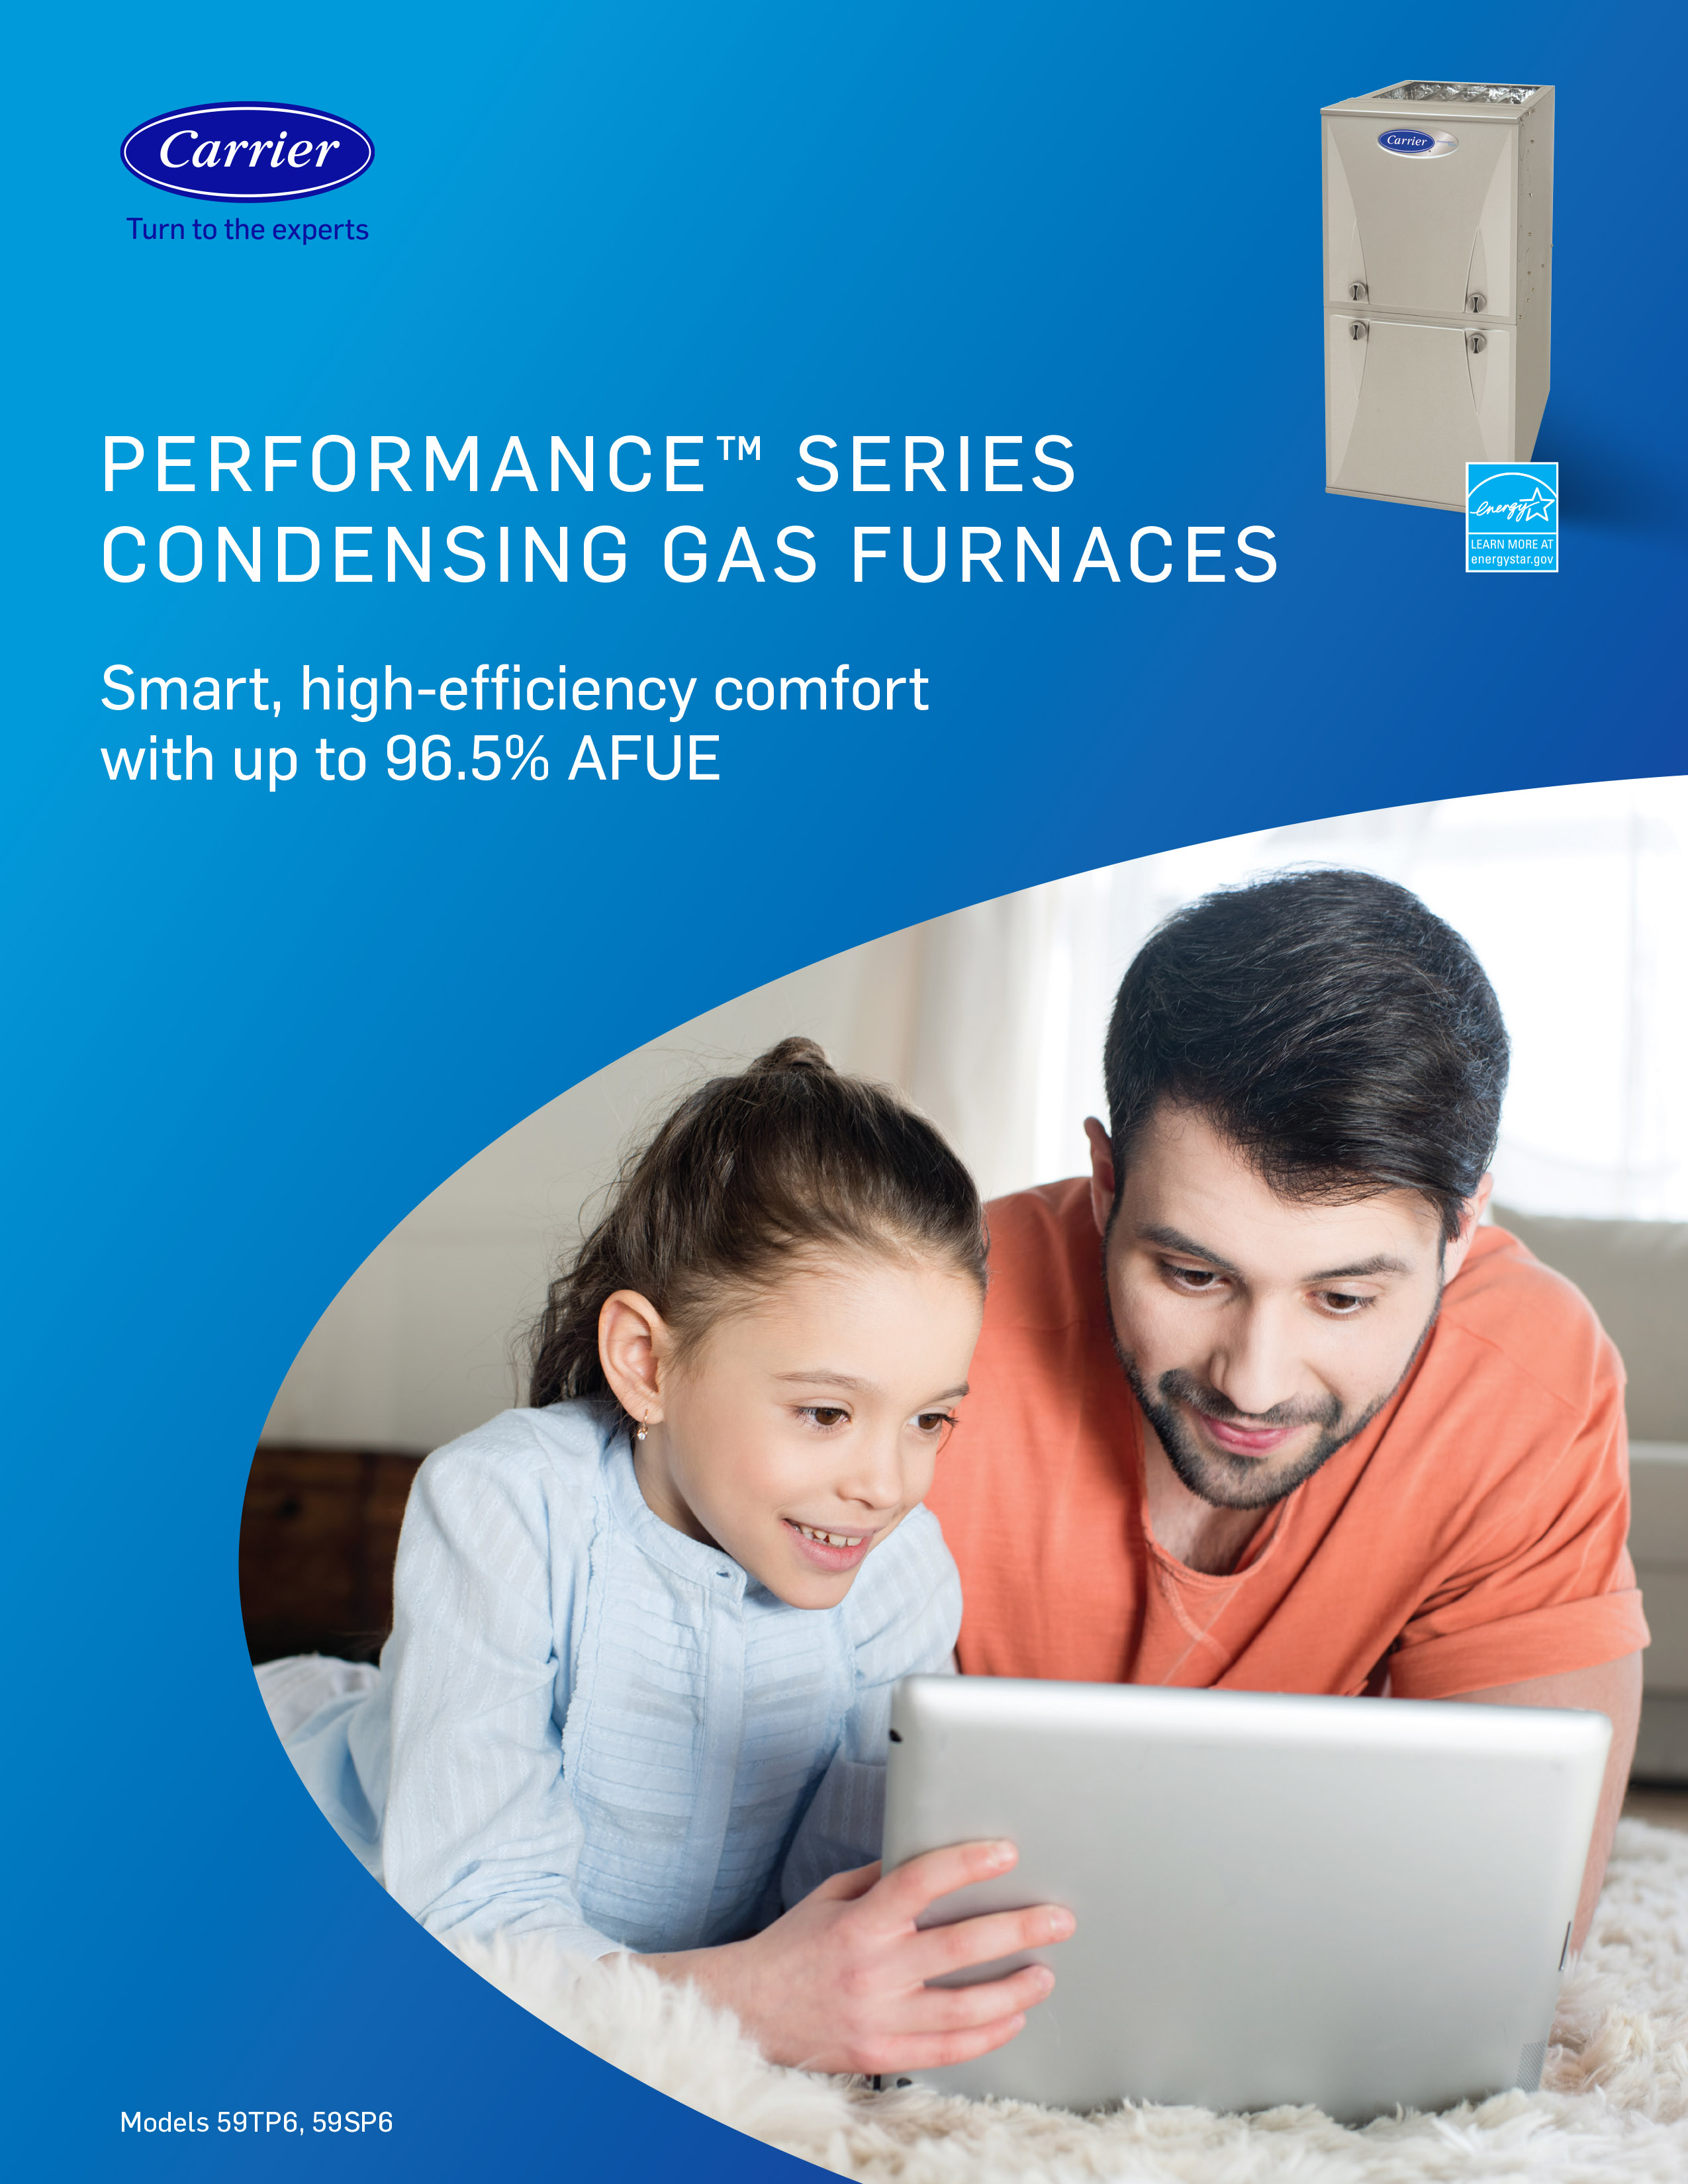 PERFORMANCE(TM) SERIES CONDENSING GAS FURNACES Smart, high-efficiency comfort with up to 96.5% AFUE. Happy father and daughter.